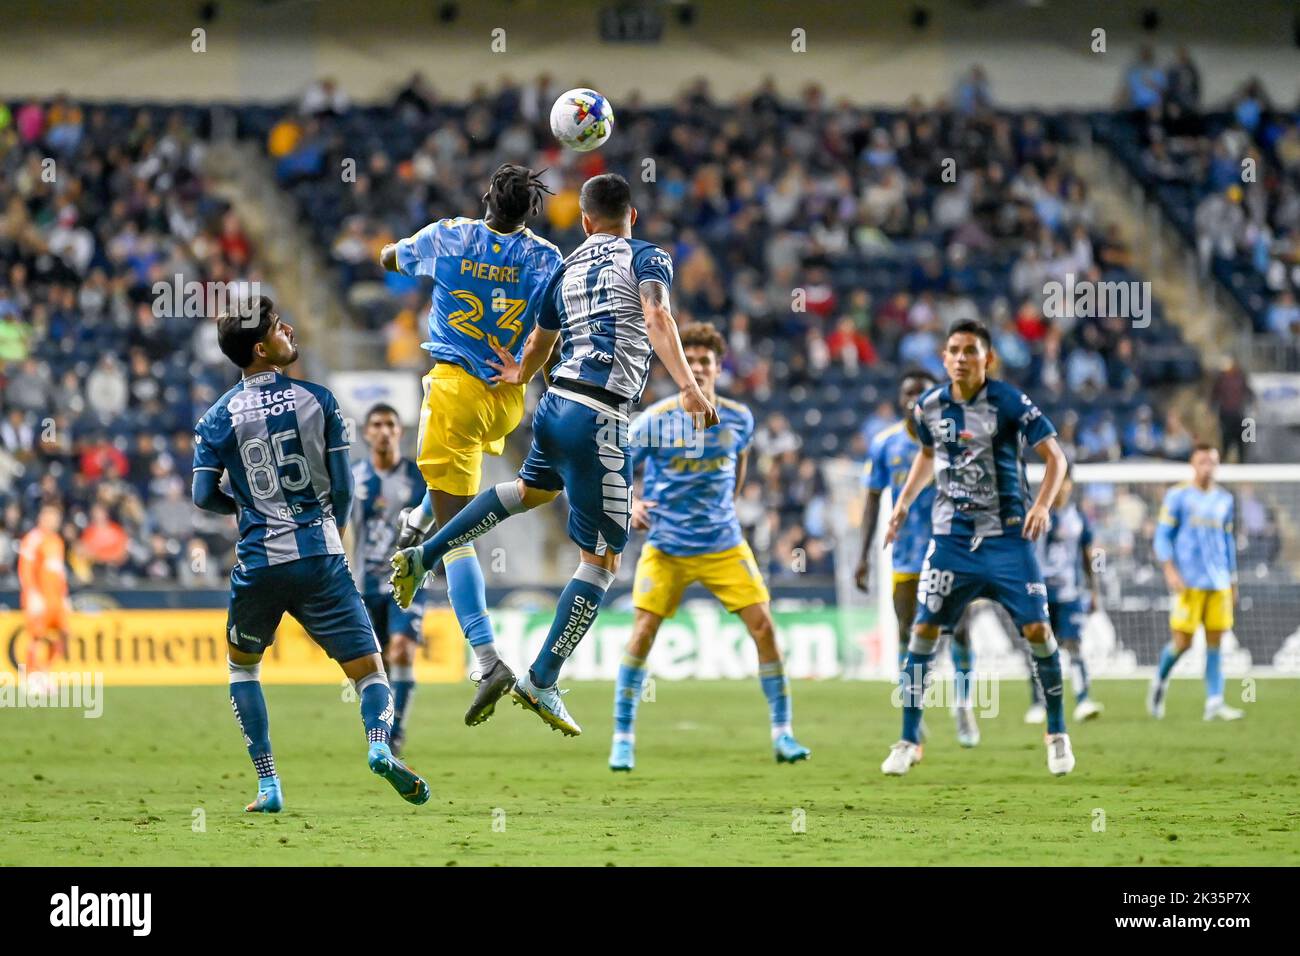 Chester, PA USA. 24th Sep - Philadelphia Union forward Nelson Pierre goes up for a header. Photo by Don Mennig - Alamy Live News Stock Photo